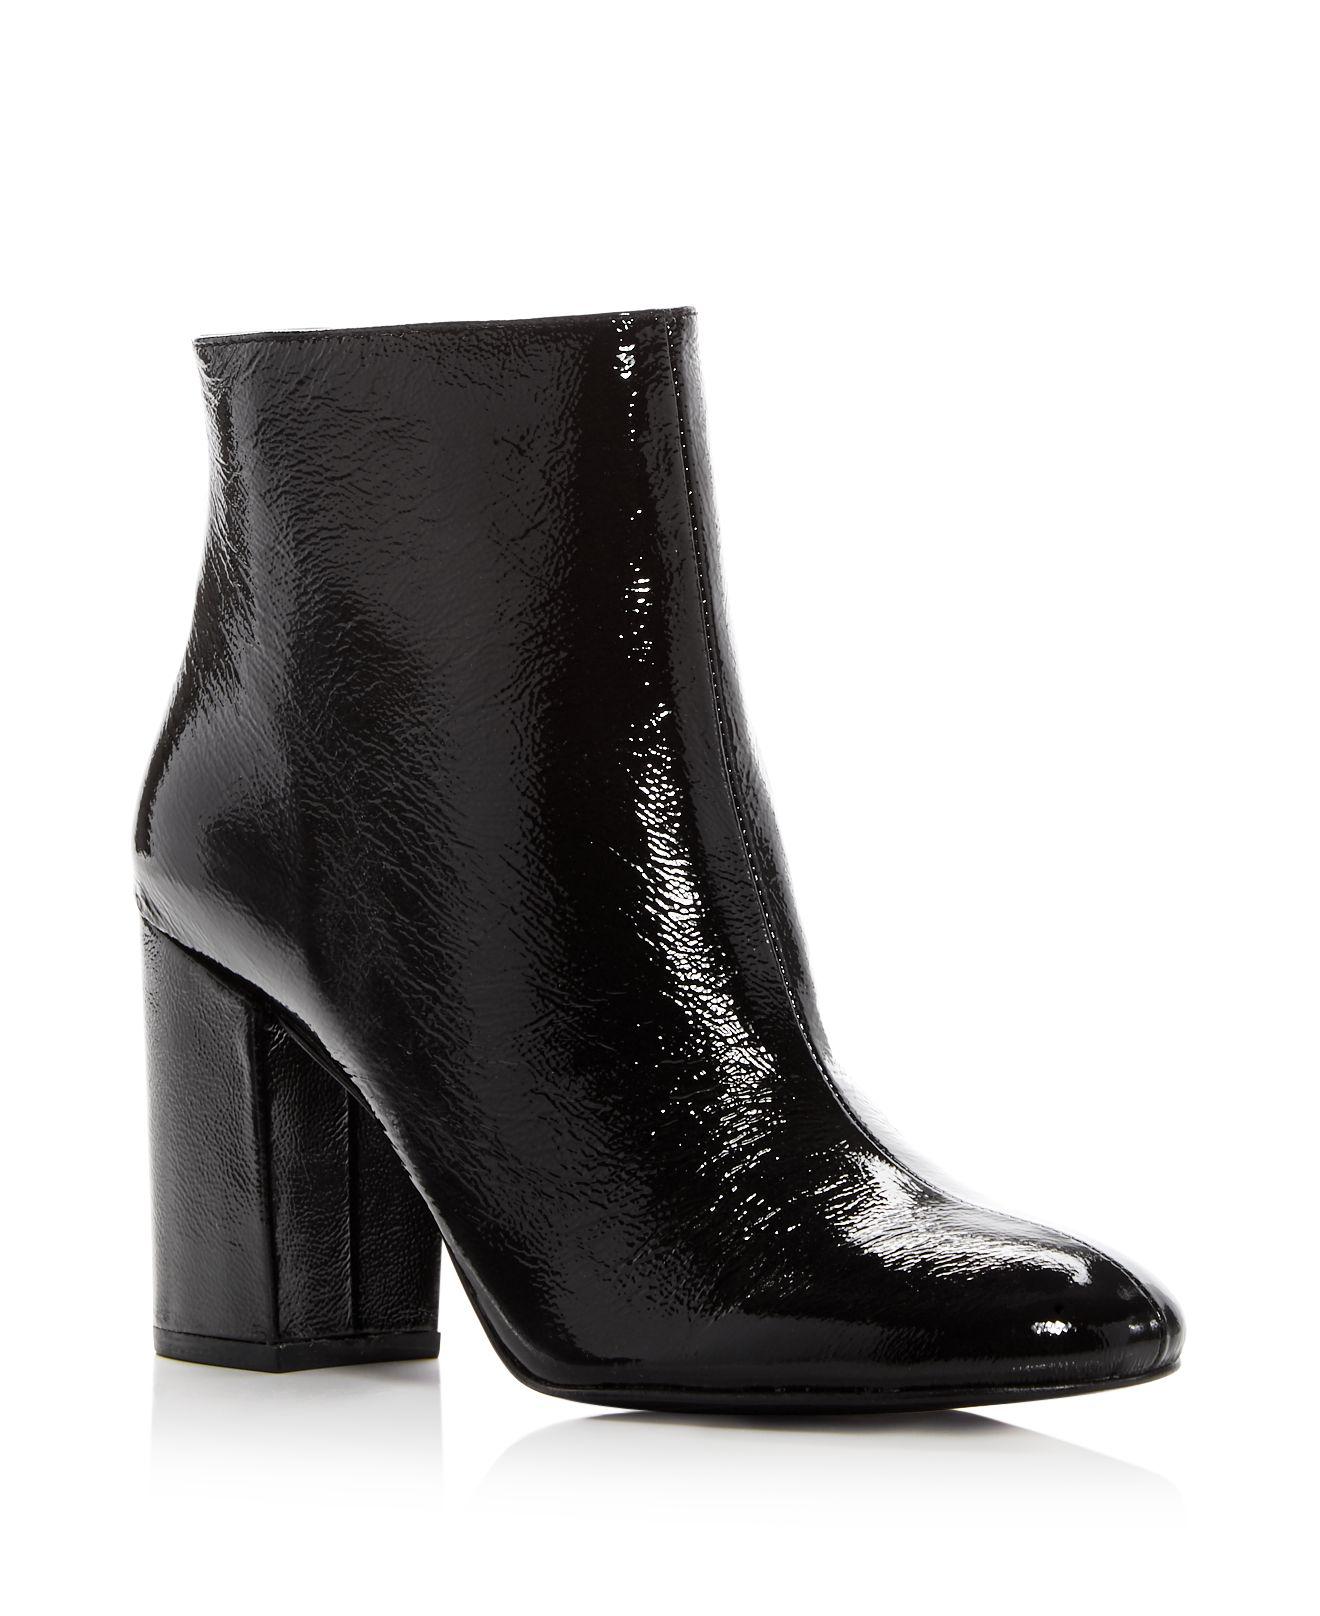 Lyst - Kenneth Cole Women's Caylee Patent Leather High Block Heel